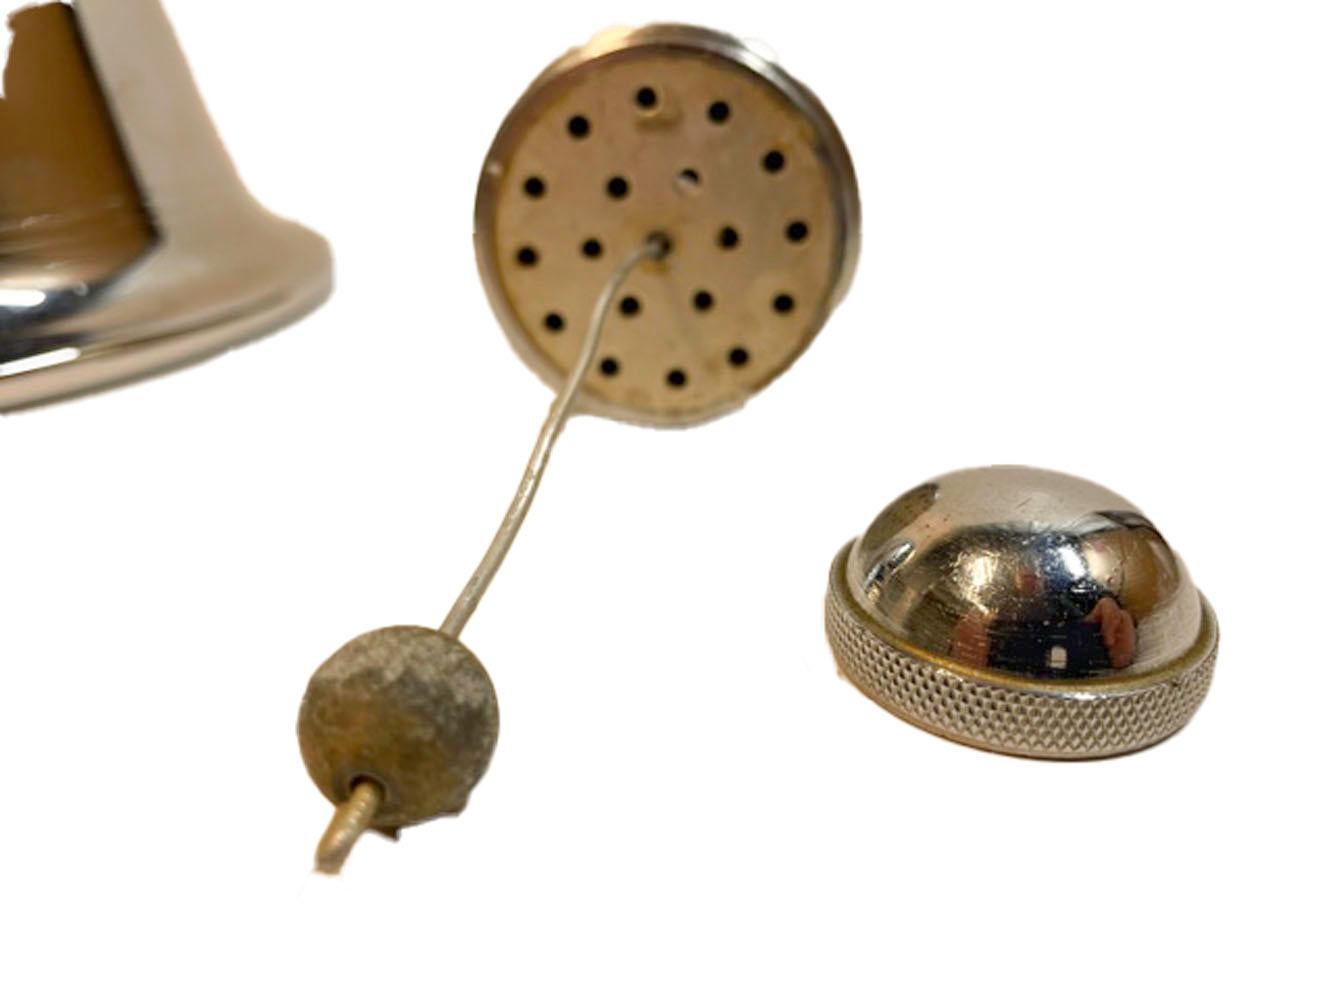 Mid-century cocktail shaker in the form of a large hand held bell. Unscrew the wood handle from the top of the bell, fill with ice and cocktail ingredients, replace the handle and shake. Then remove the cap from the top of the handle and pour.